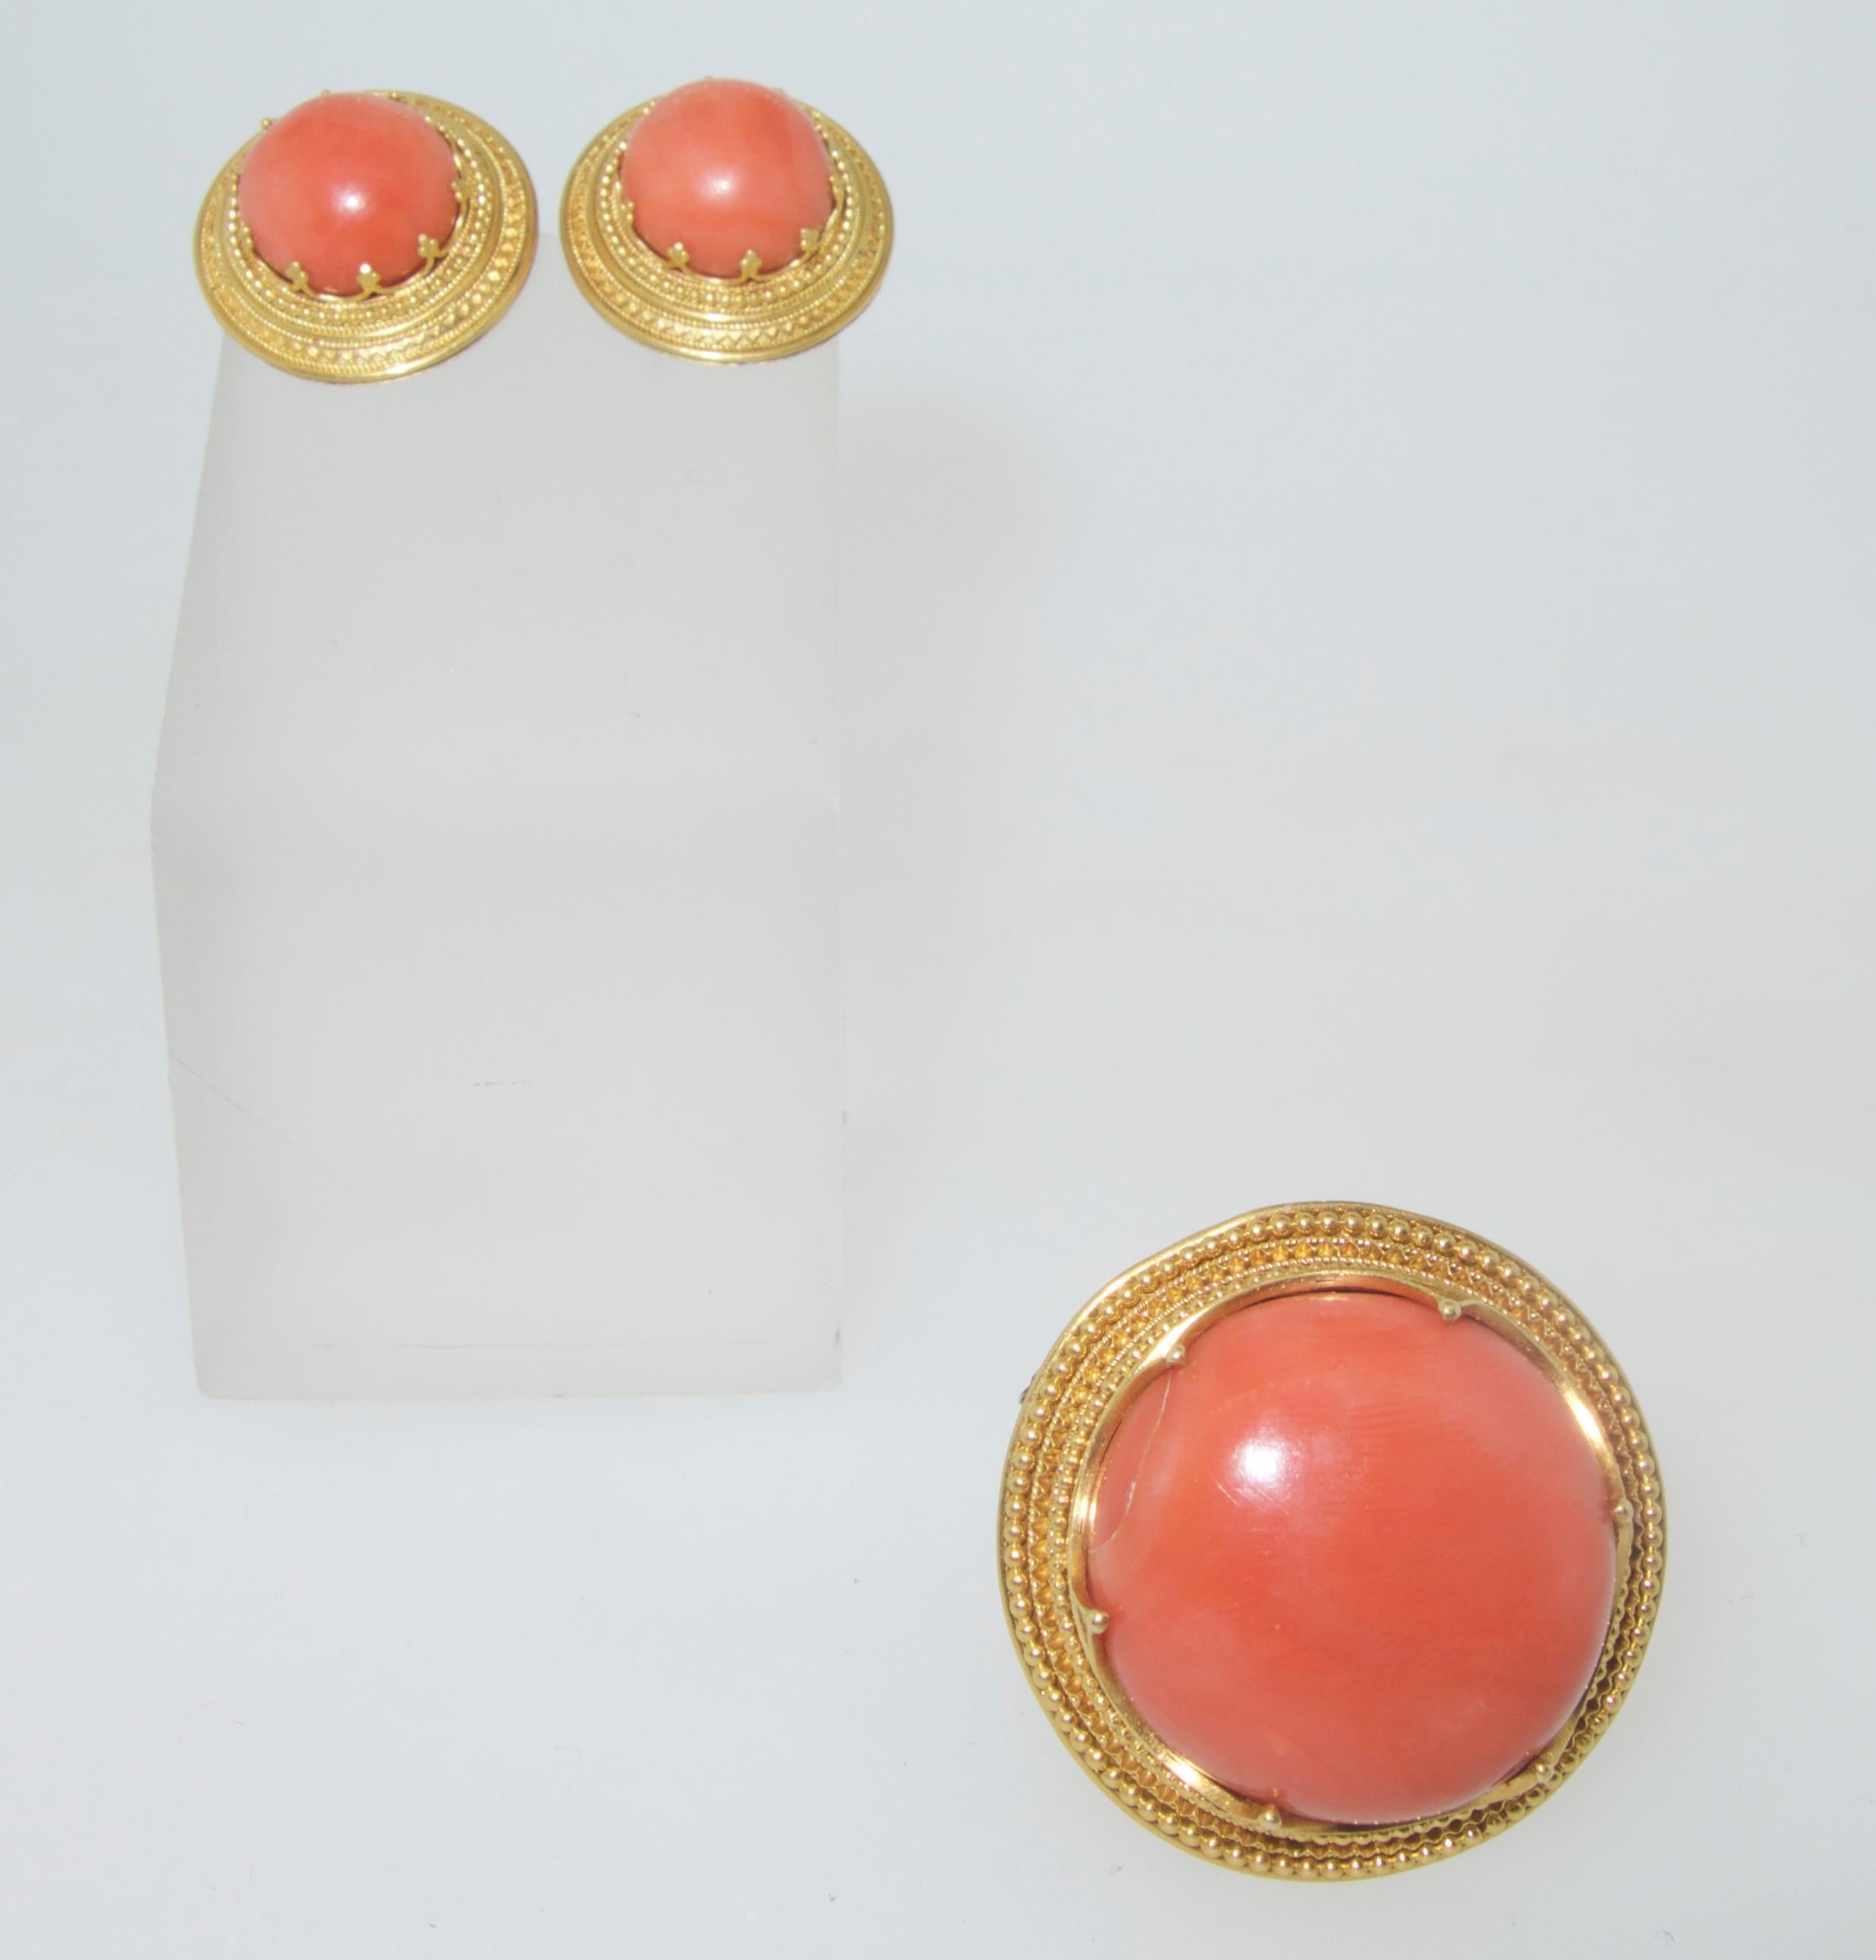 Etruscan Revival antique earrings with matching brooch, the center coral is 13.2 mm. in diameter in the earrings, and 23.5 mm in the brooch.  The coral is, of course, natural and quite large in size which would be very difficult to find today